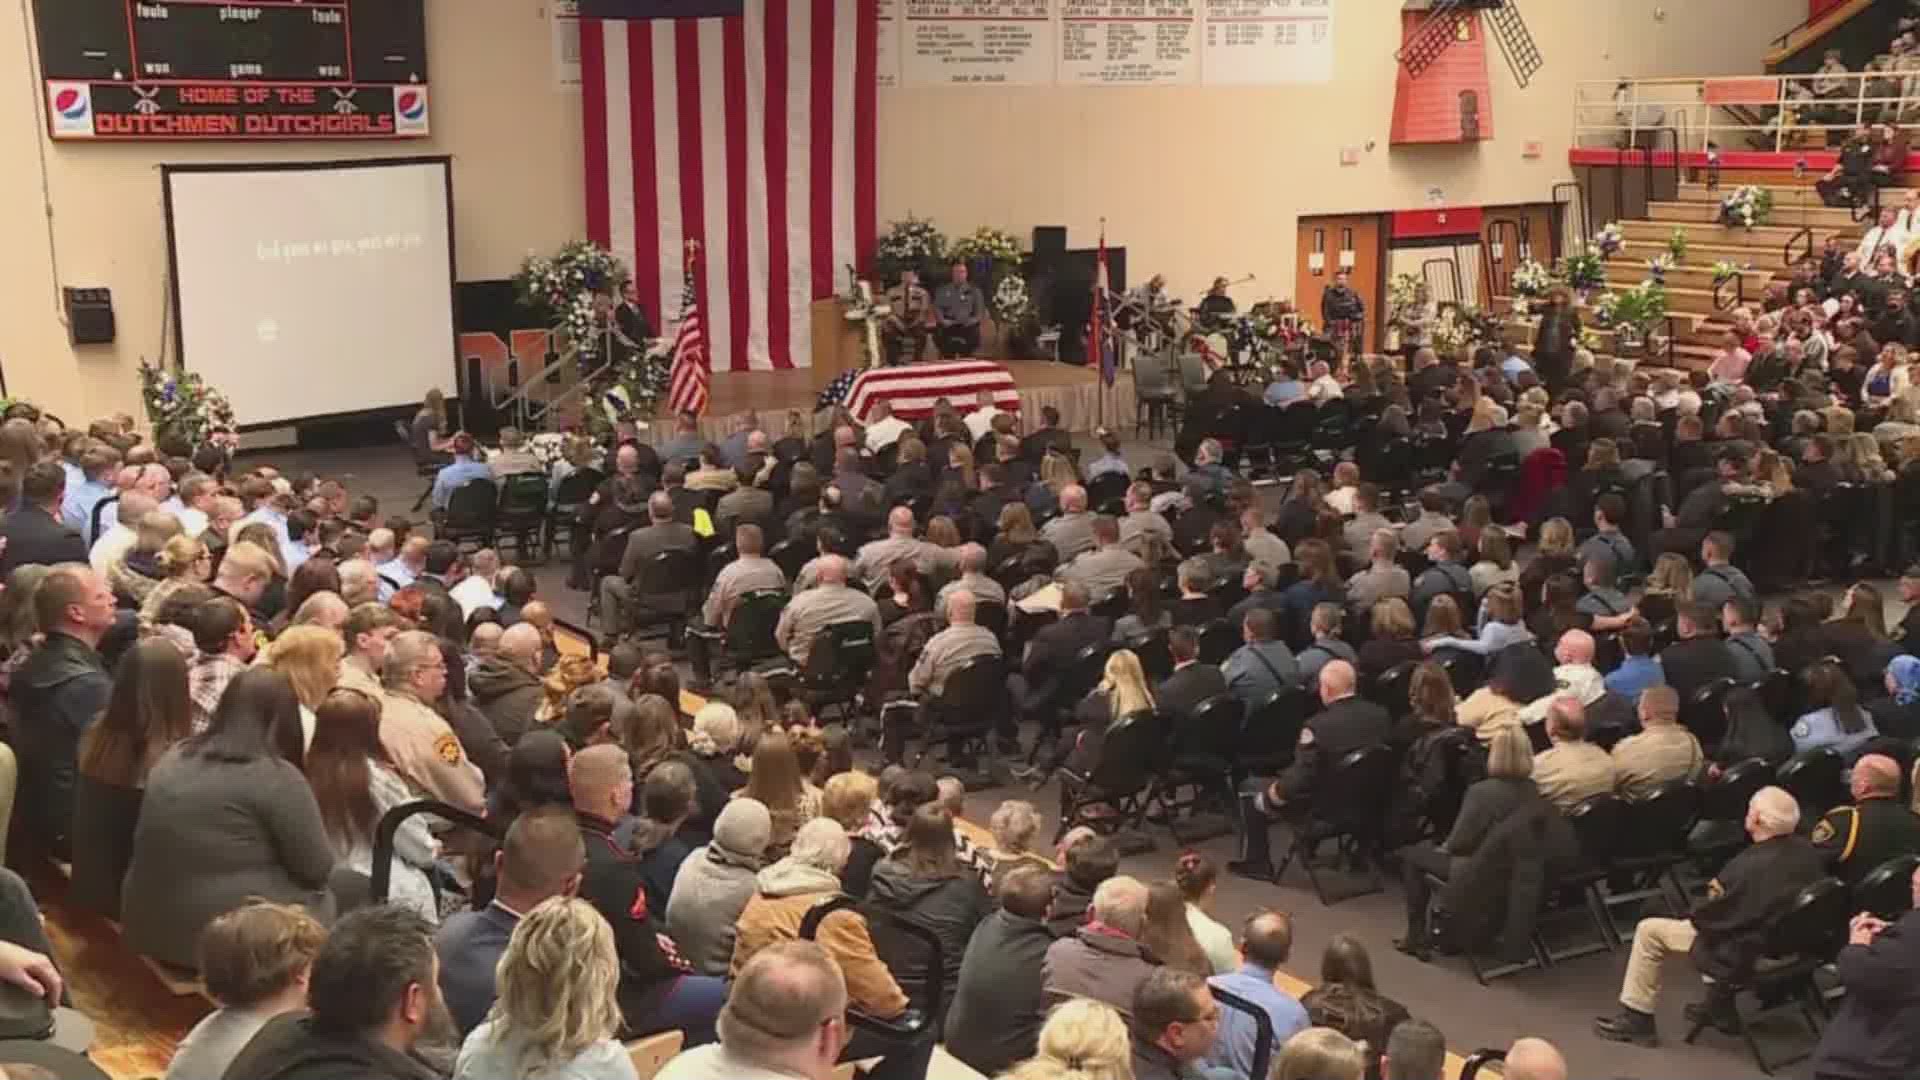 Friends, family and the community are honoring Det. Sgt. Griffith after he was shot and killed on March 12.